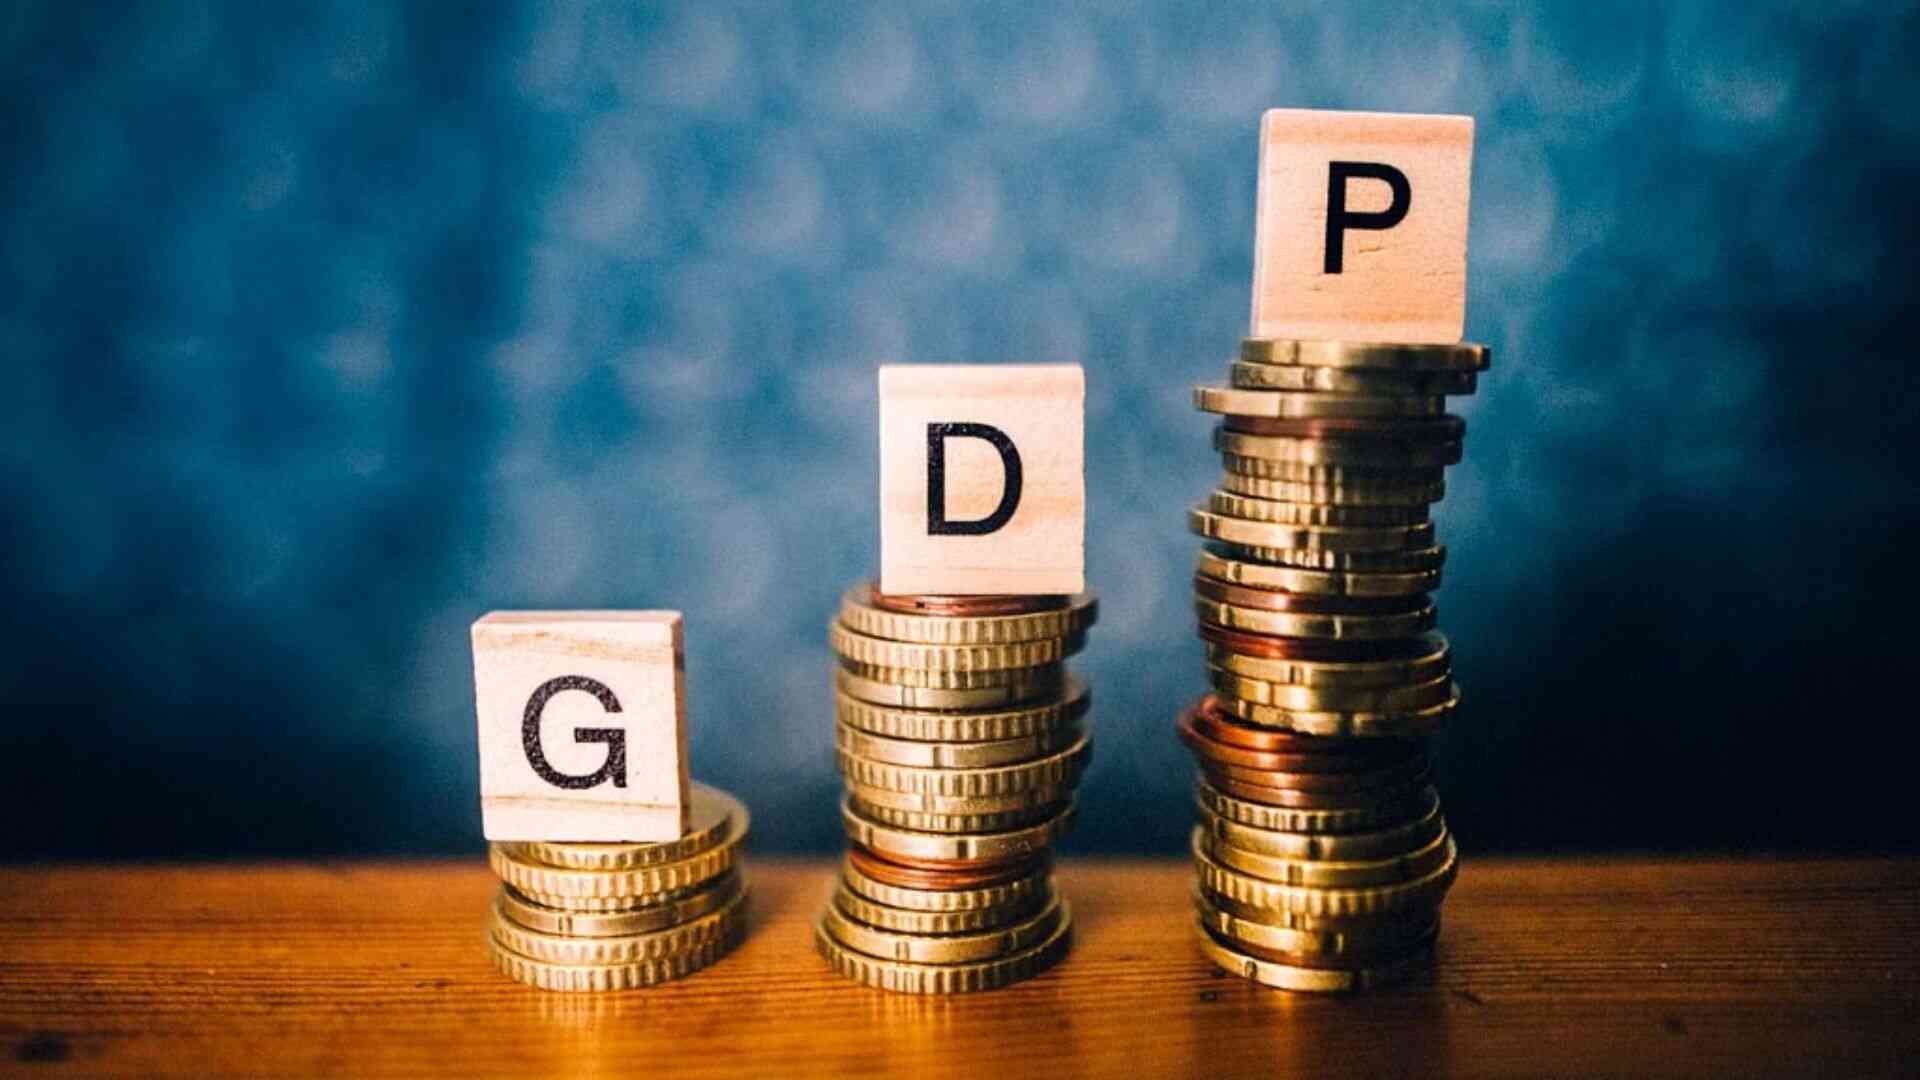 China’s Second-Quarter GDP Growth Below Forecasted Levels